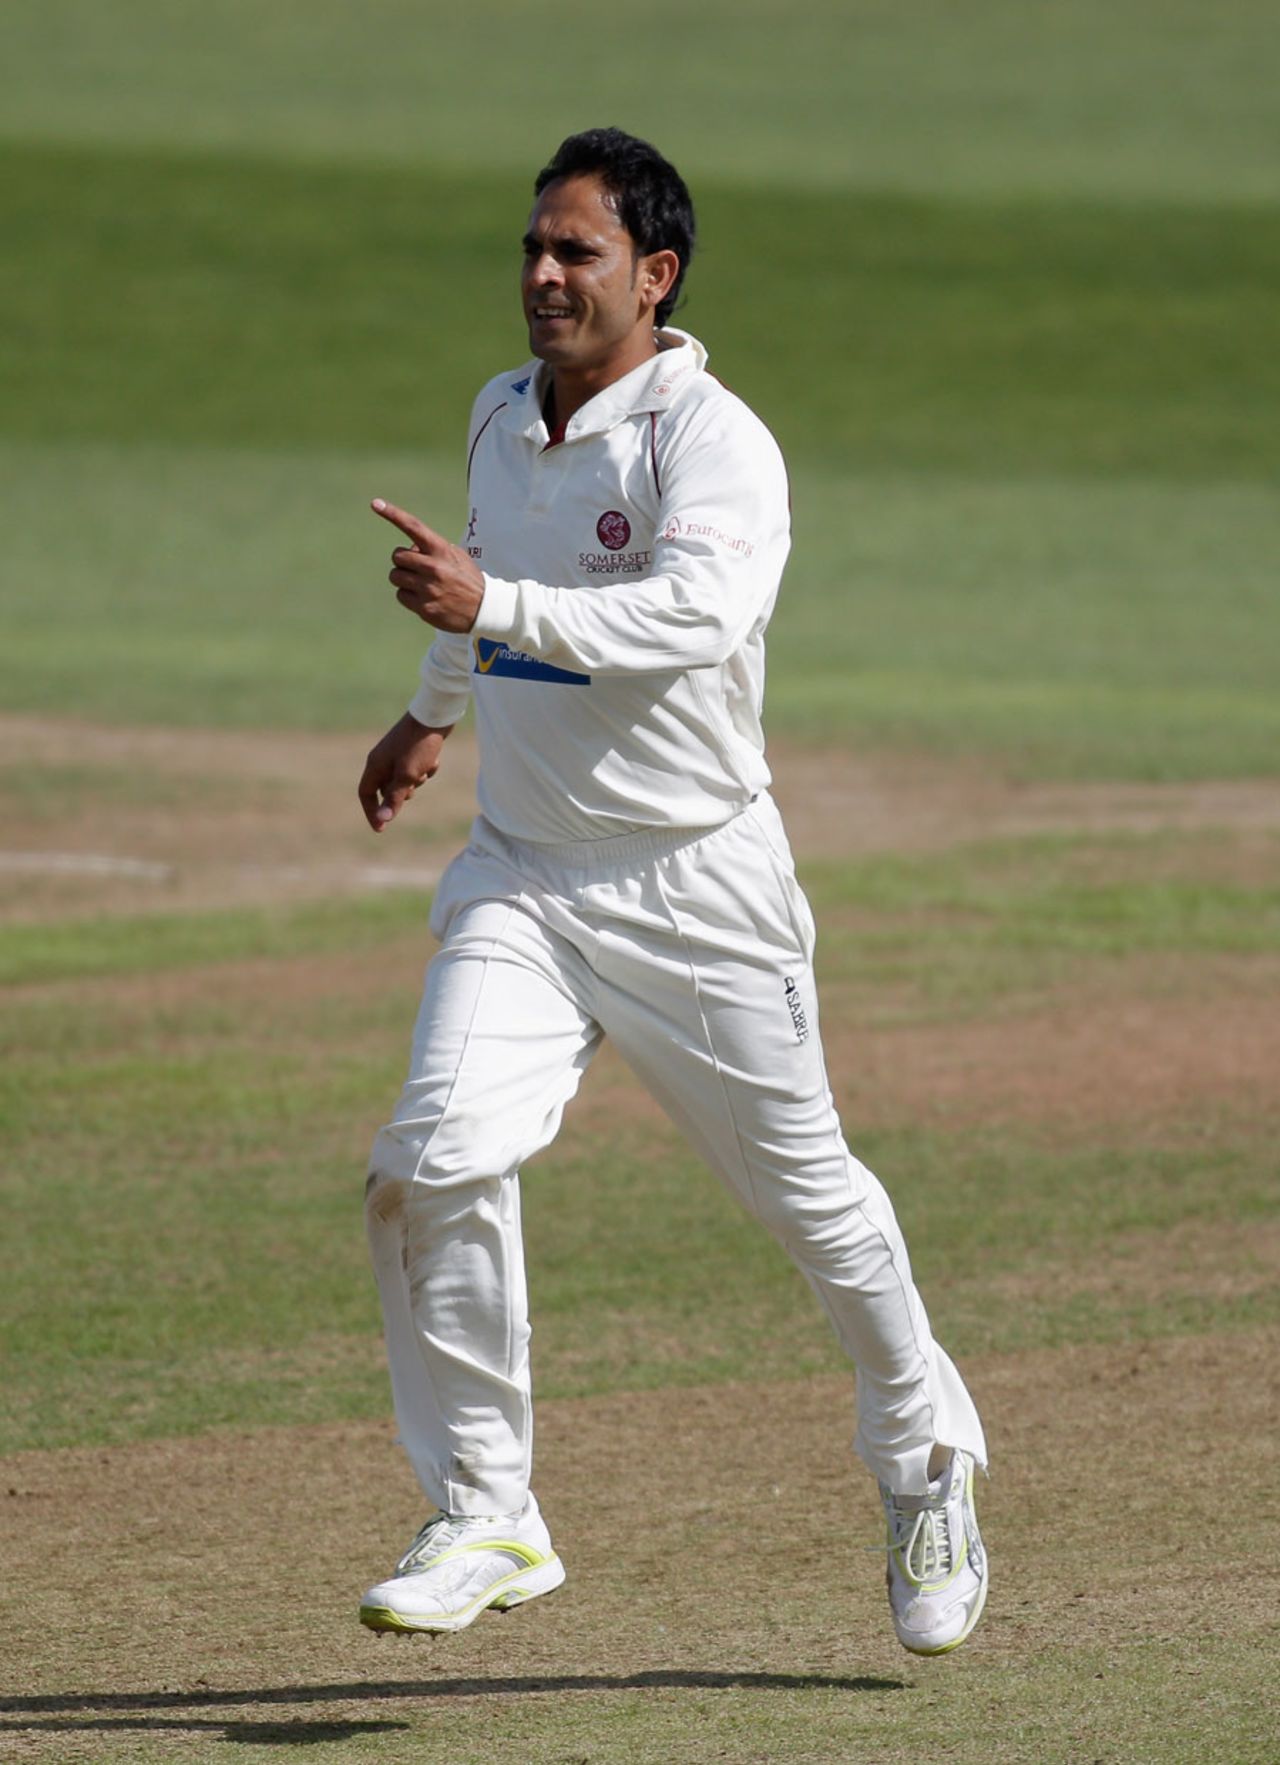 Abdur Rehman claimed the wicket of Murray Goodwin early on, Somerset v Sussex, County Championship, Division One, Taunton, August 22, 2012